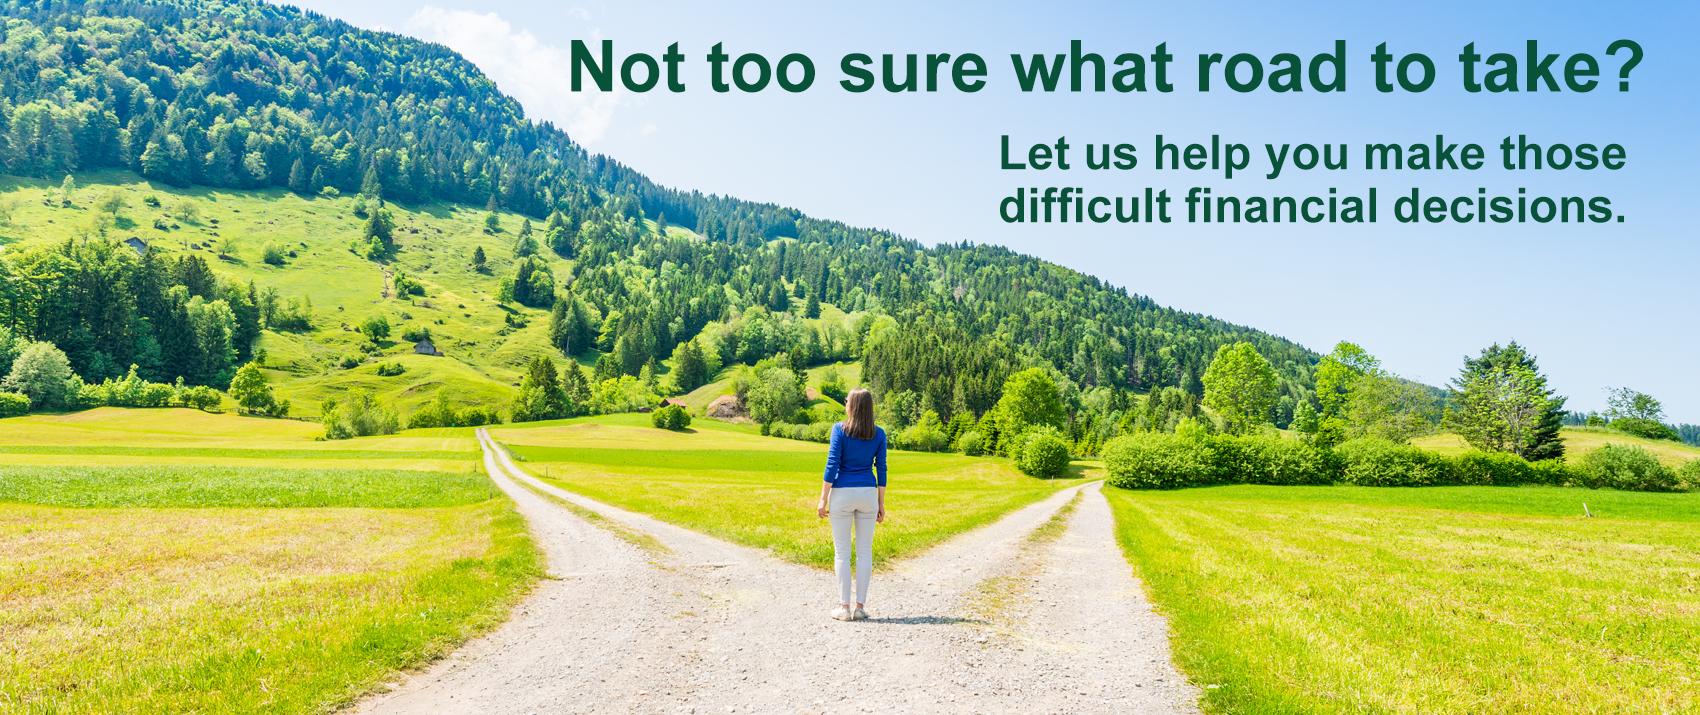 Not too sure what road to take? Let us help you make those difficult financial decisions.